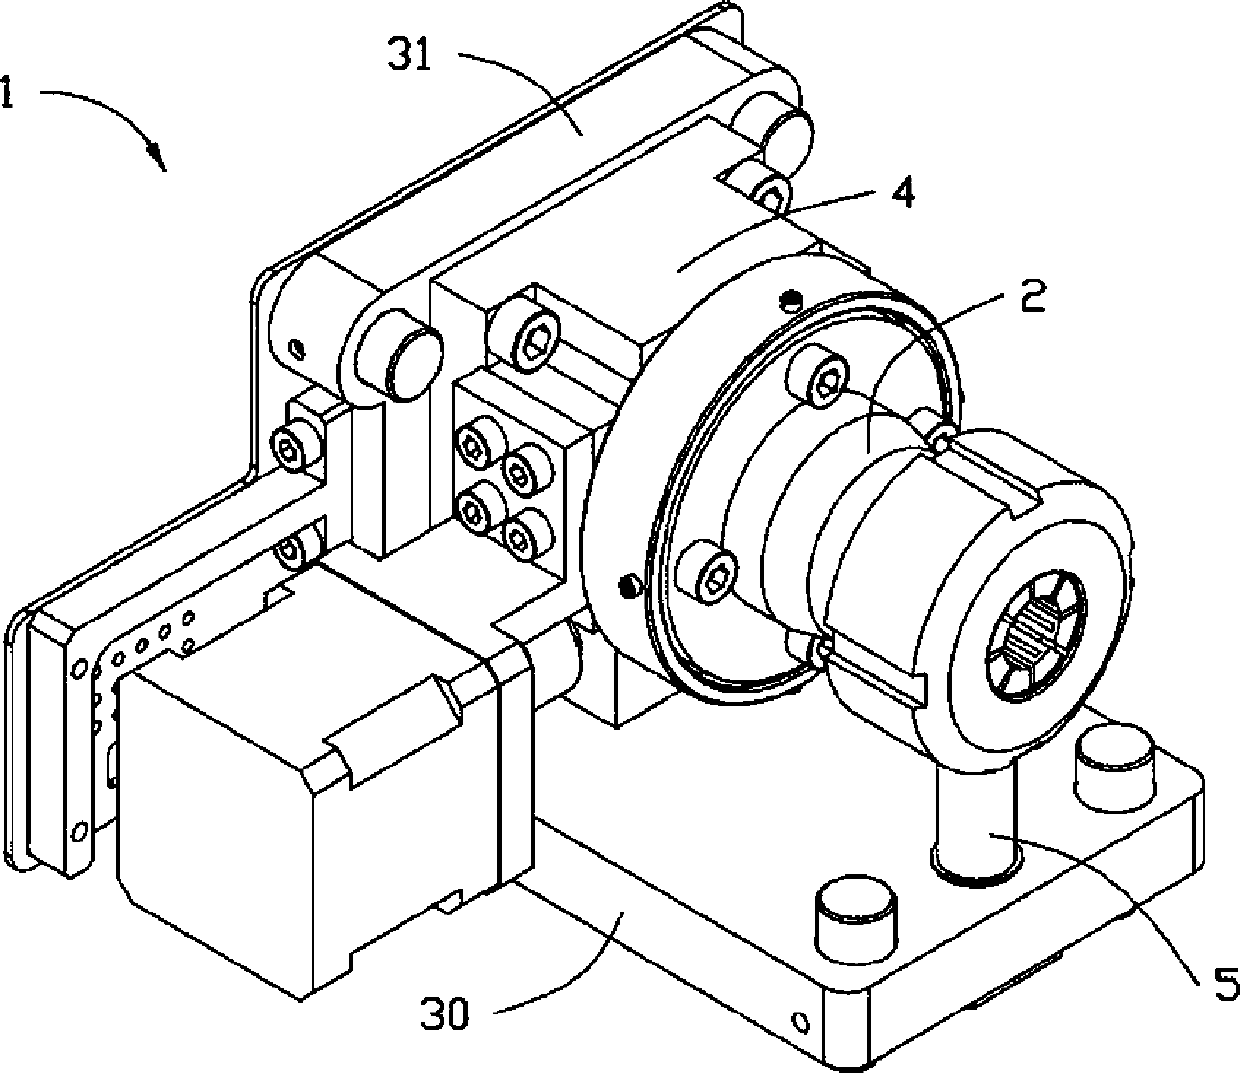 Fourth shaft device of image measuring instrument